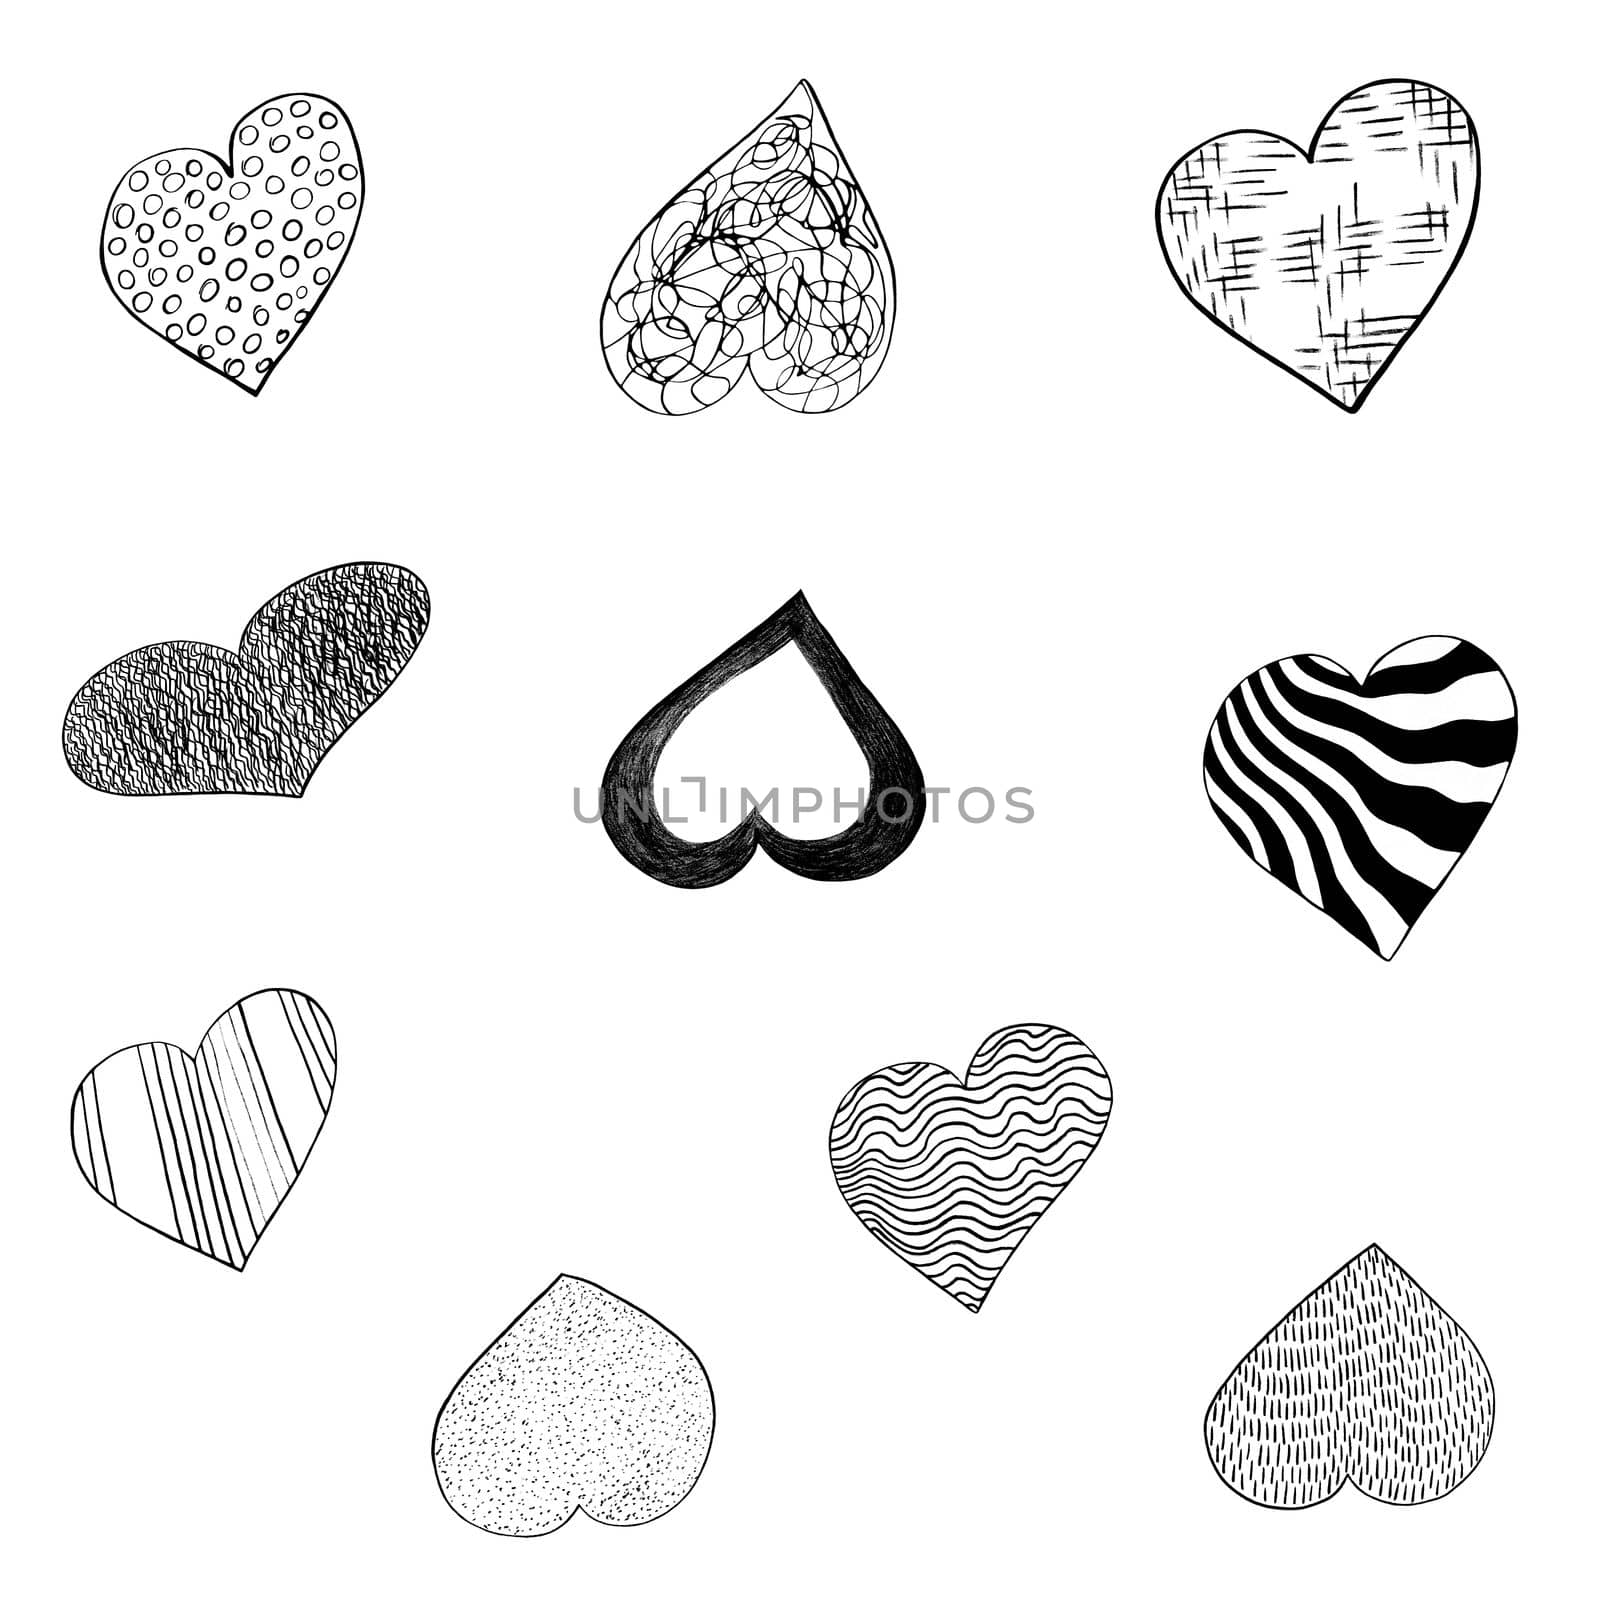 Set of Black Hearts Drawn by Pencil. Heart Shape Isolated on White Background. by Rina_Dozornaya